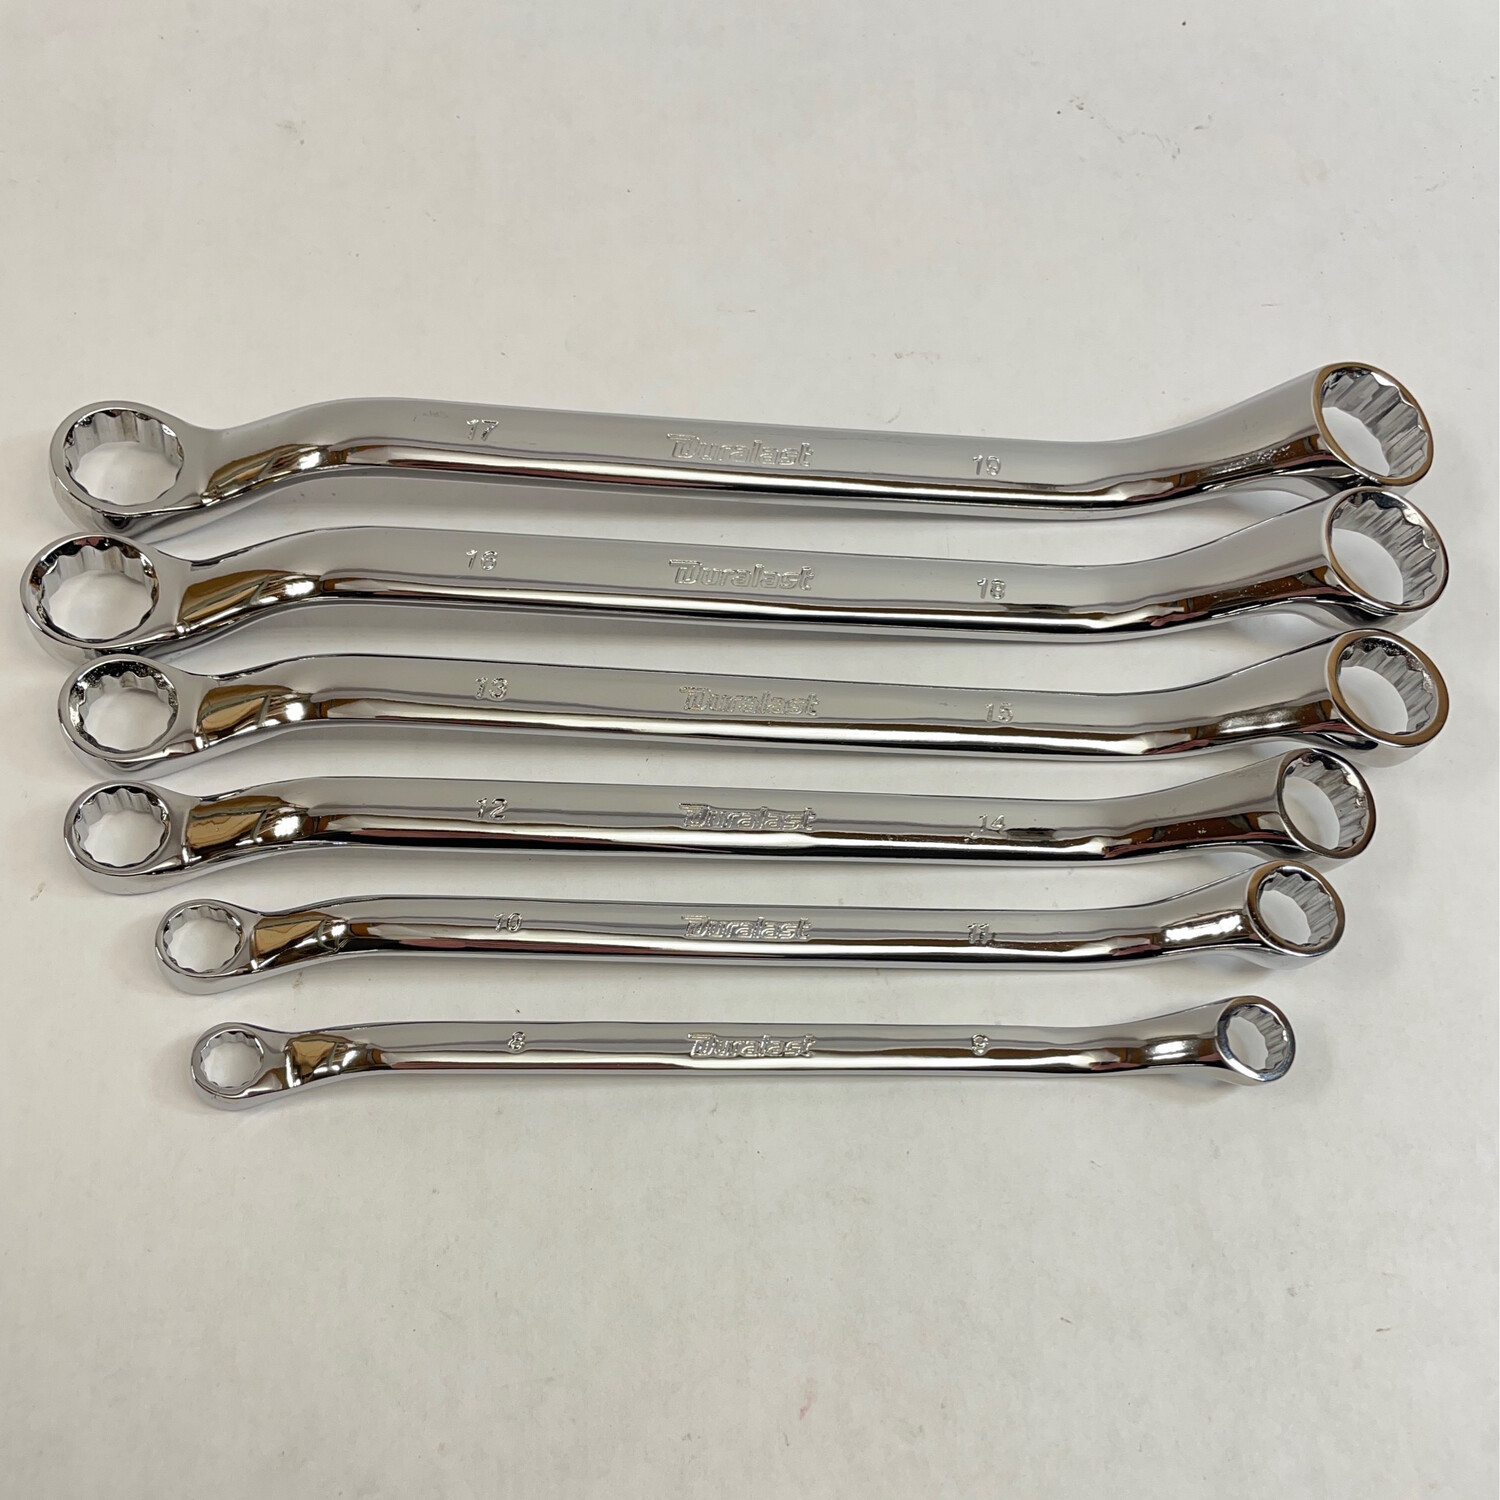 Duralast 6 Pc. Metric Double Box End Wrench Set (8-19mm)